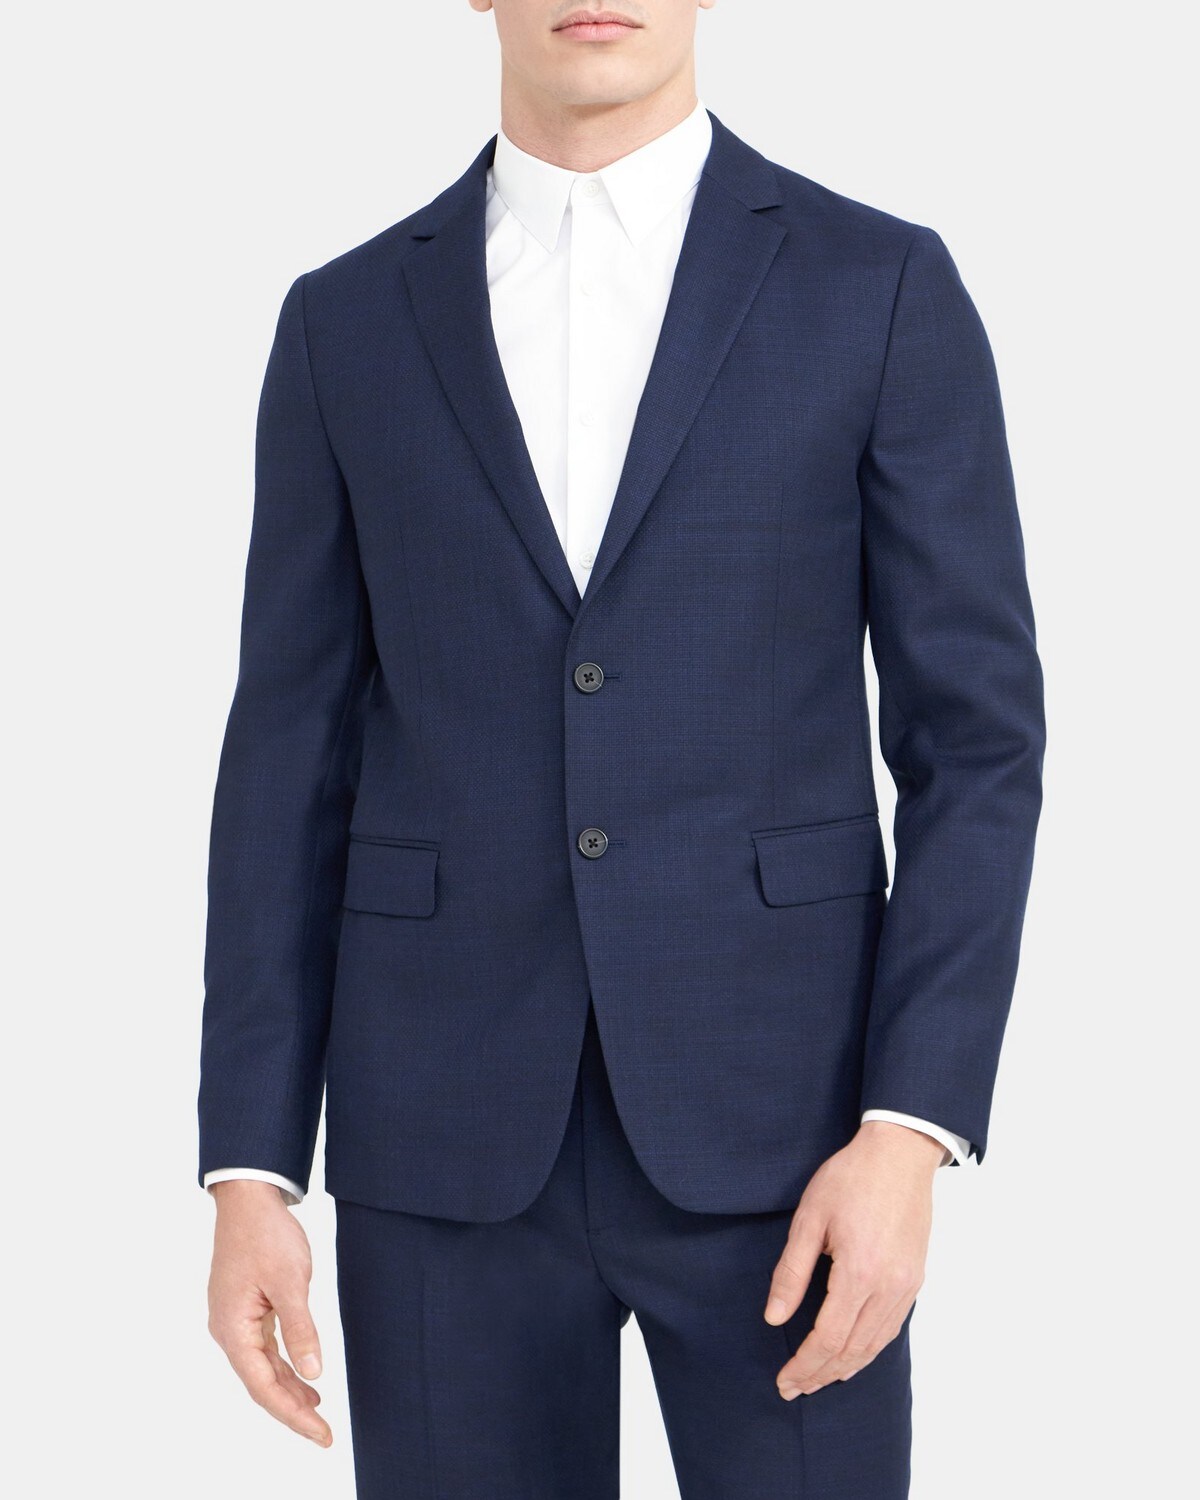 Unstructured Suit Jacket in Textured Wool